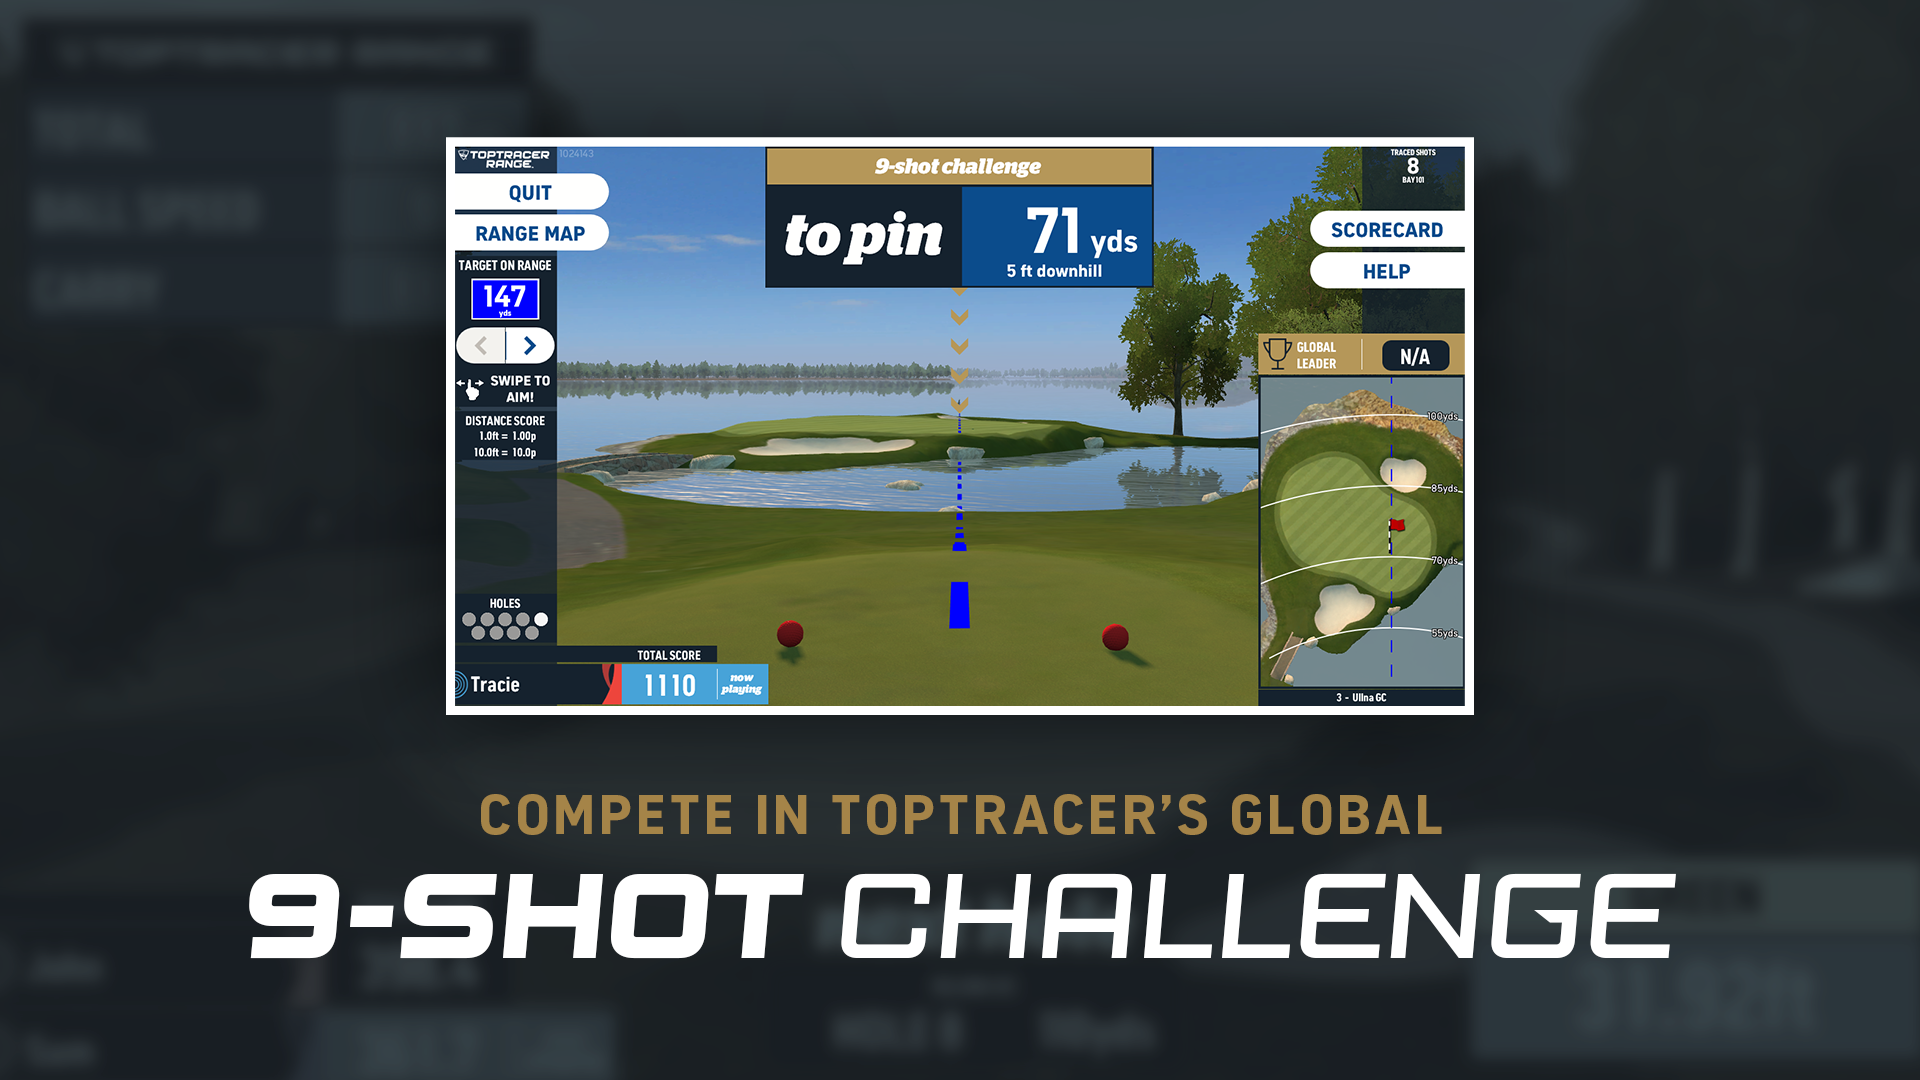 Toptracer welcomes golfers to tee up in Global 9-Shot Range Challenge 